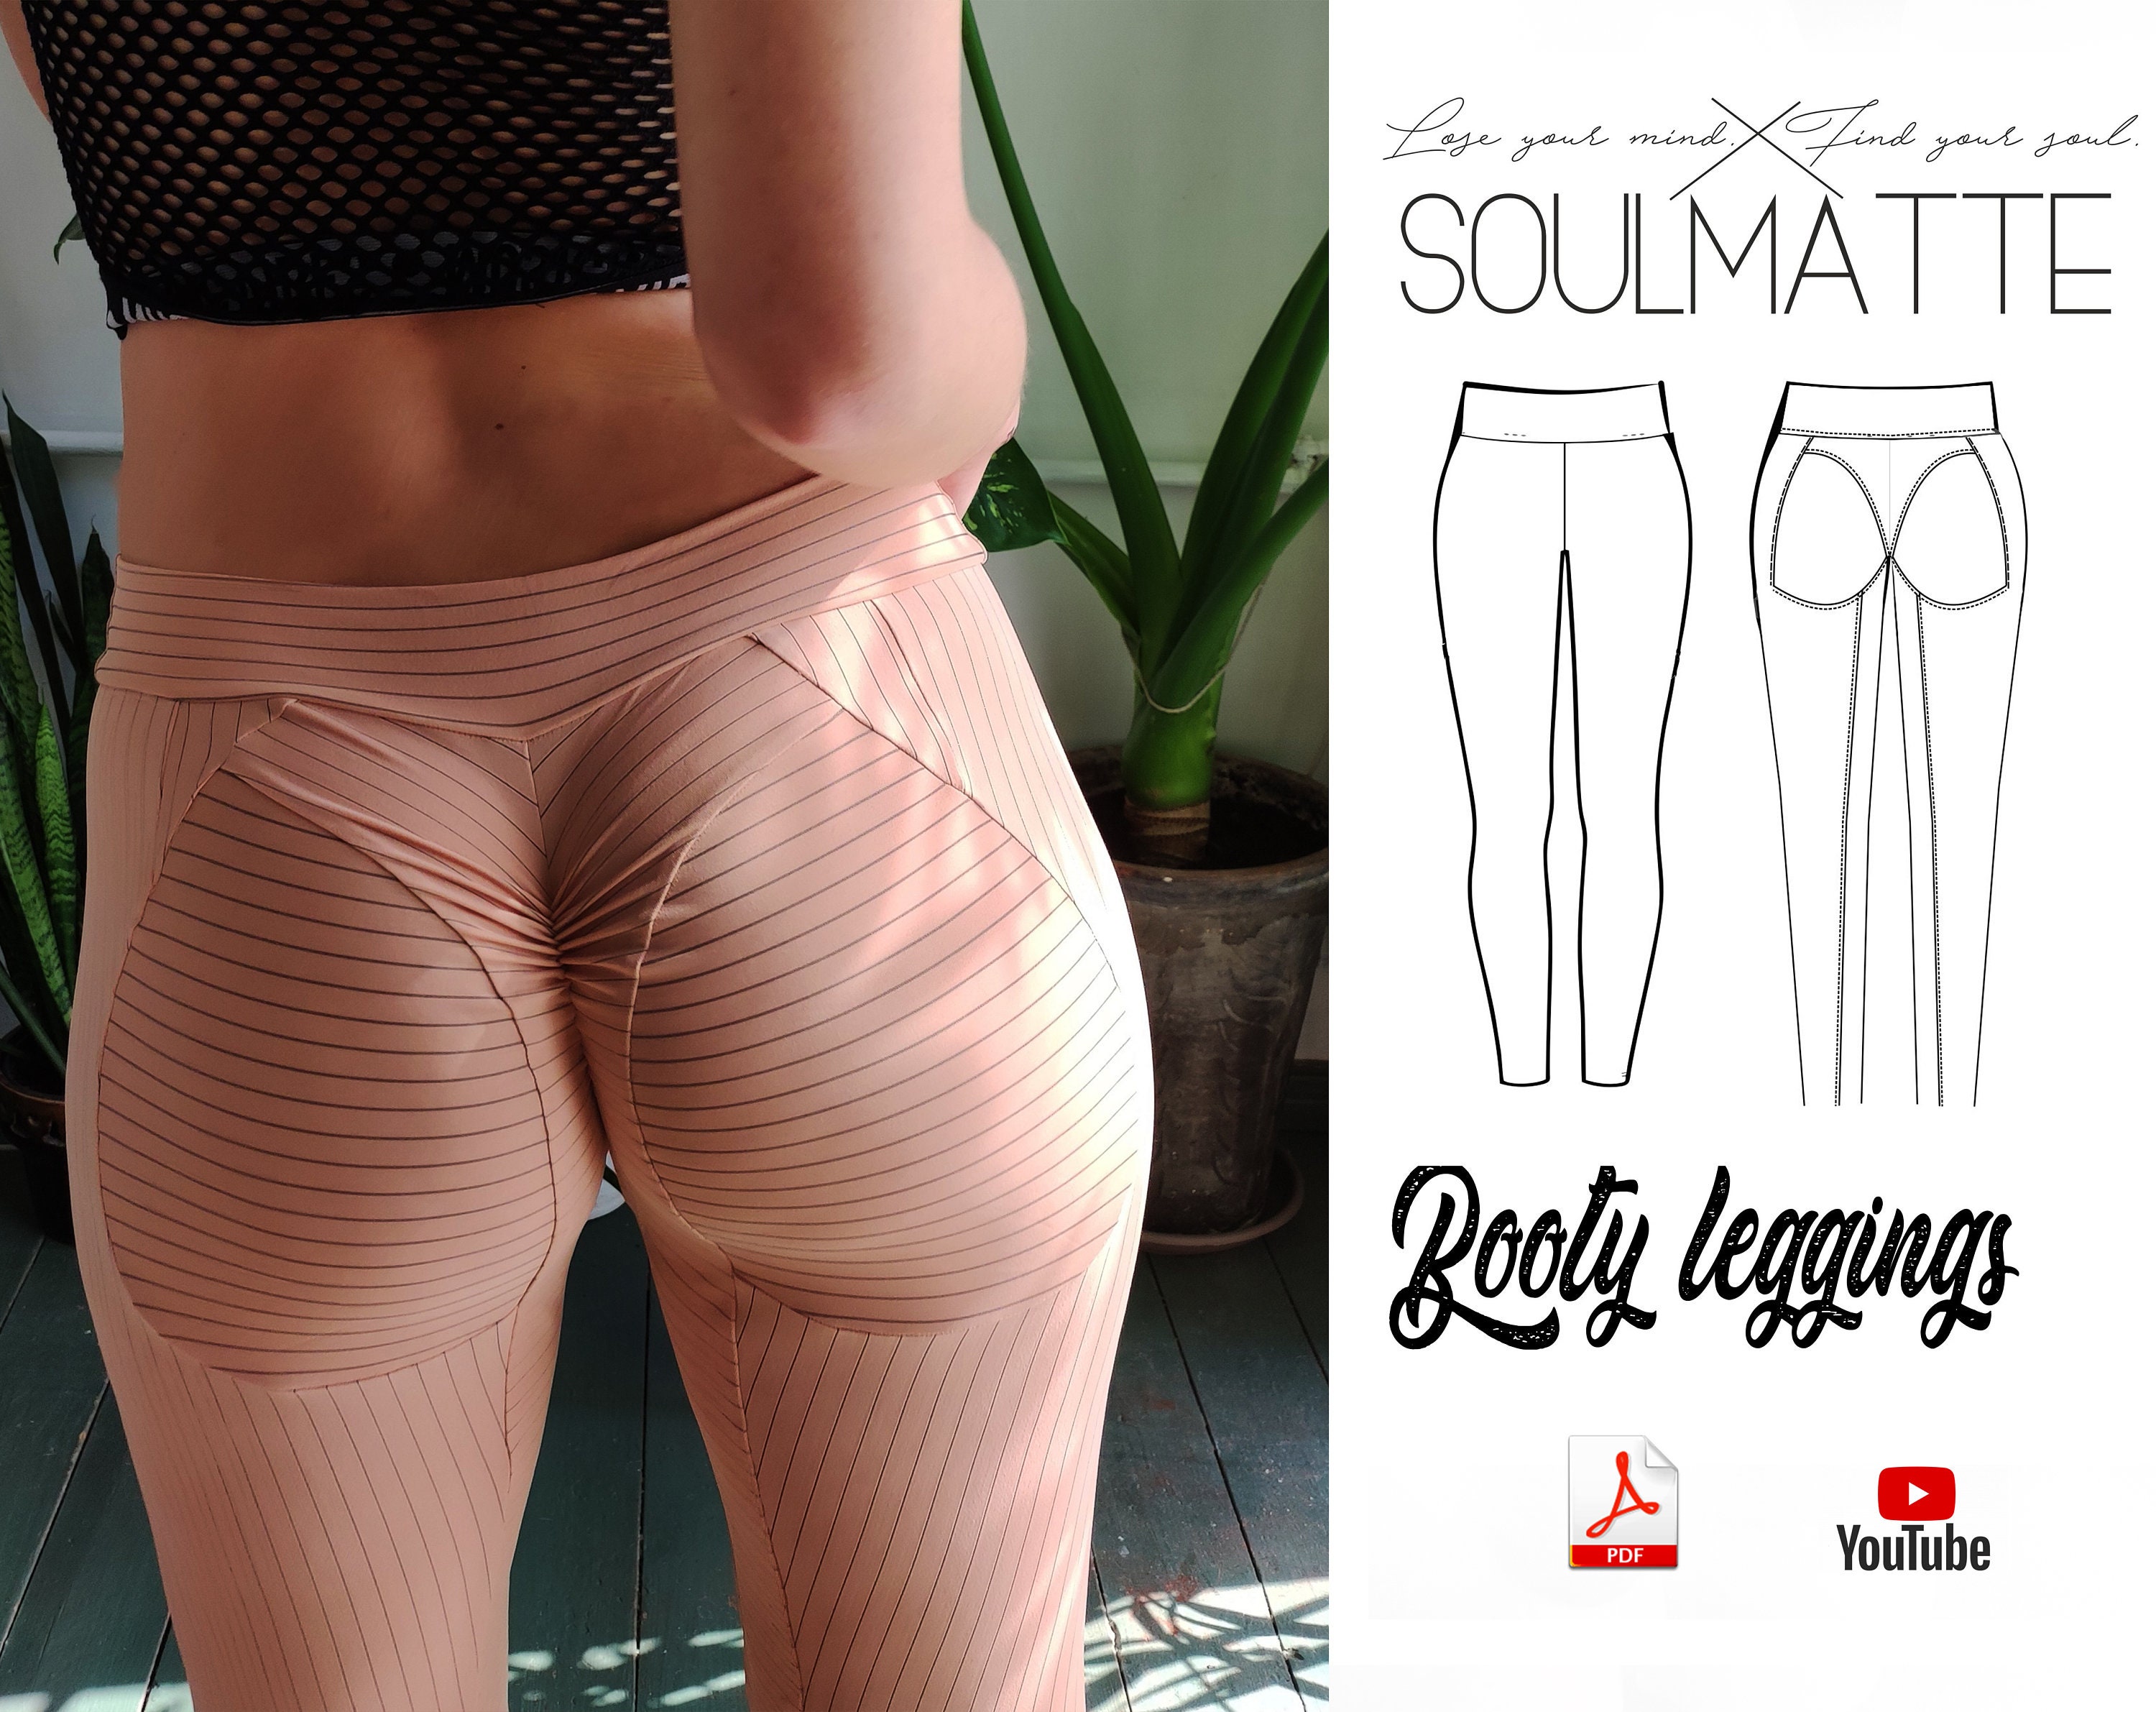 CUSTOM LEGGINGS Black Pants Workout Yoga Gym Your Text Here Personalized  Customized Printed Funny Booty Squat Butt Ass Girl Wife Gift 